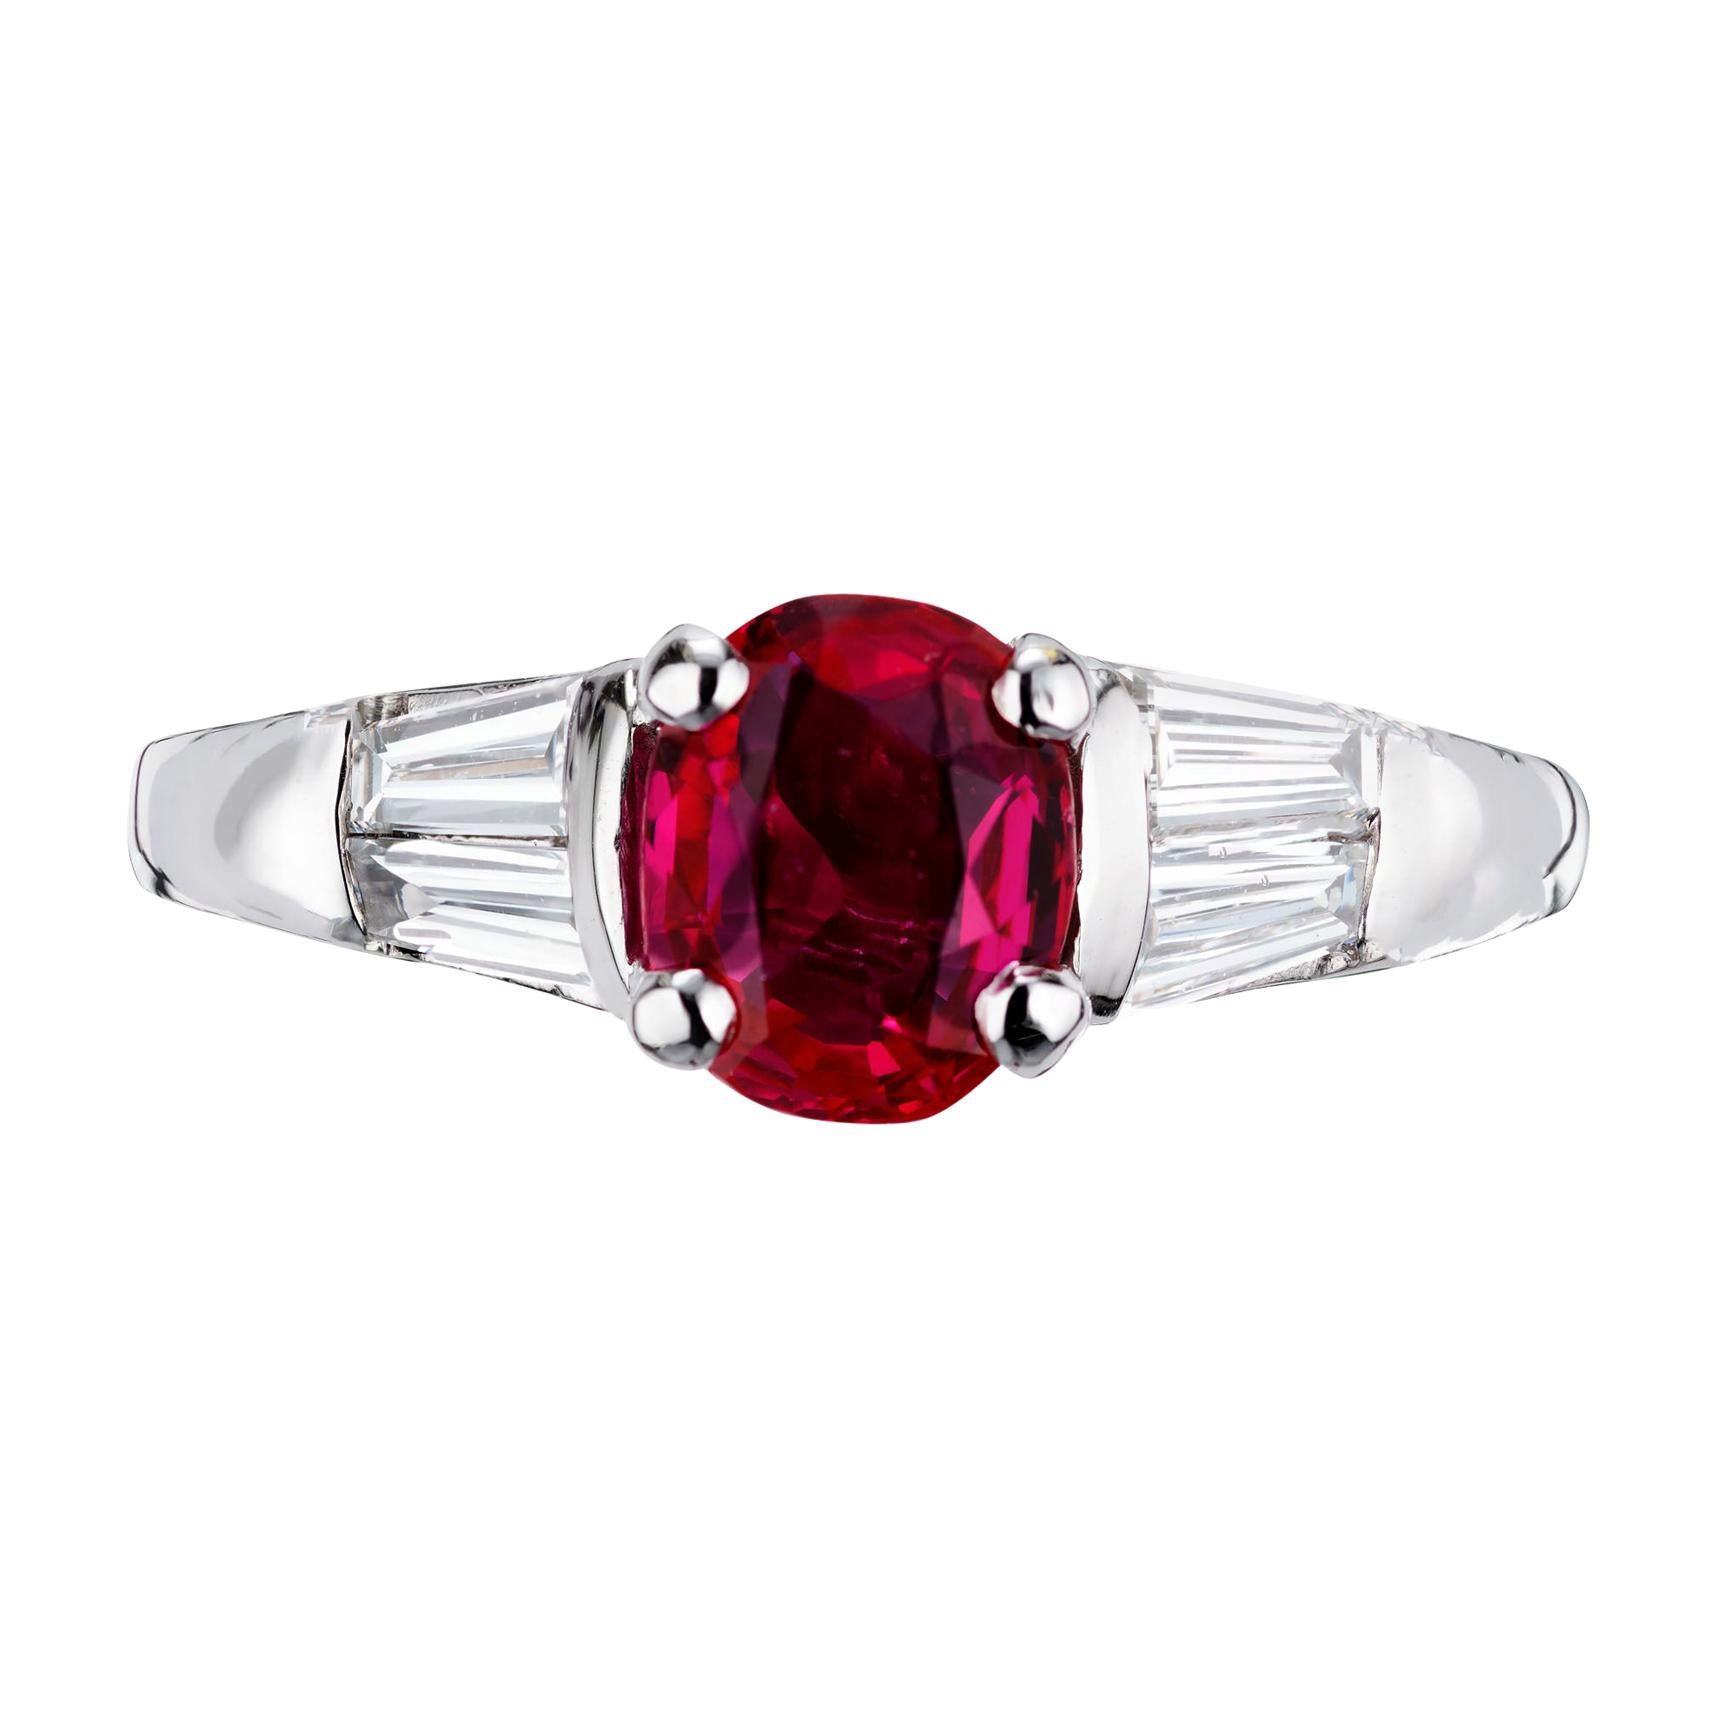 Peter Suchy GIA Certified 1.10 Ruby Diamond Platinum Engagement Ring